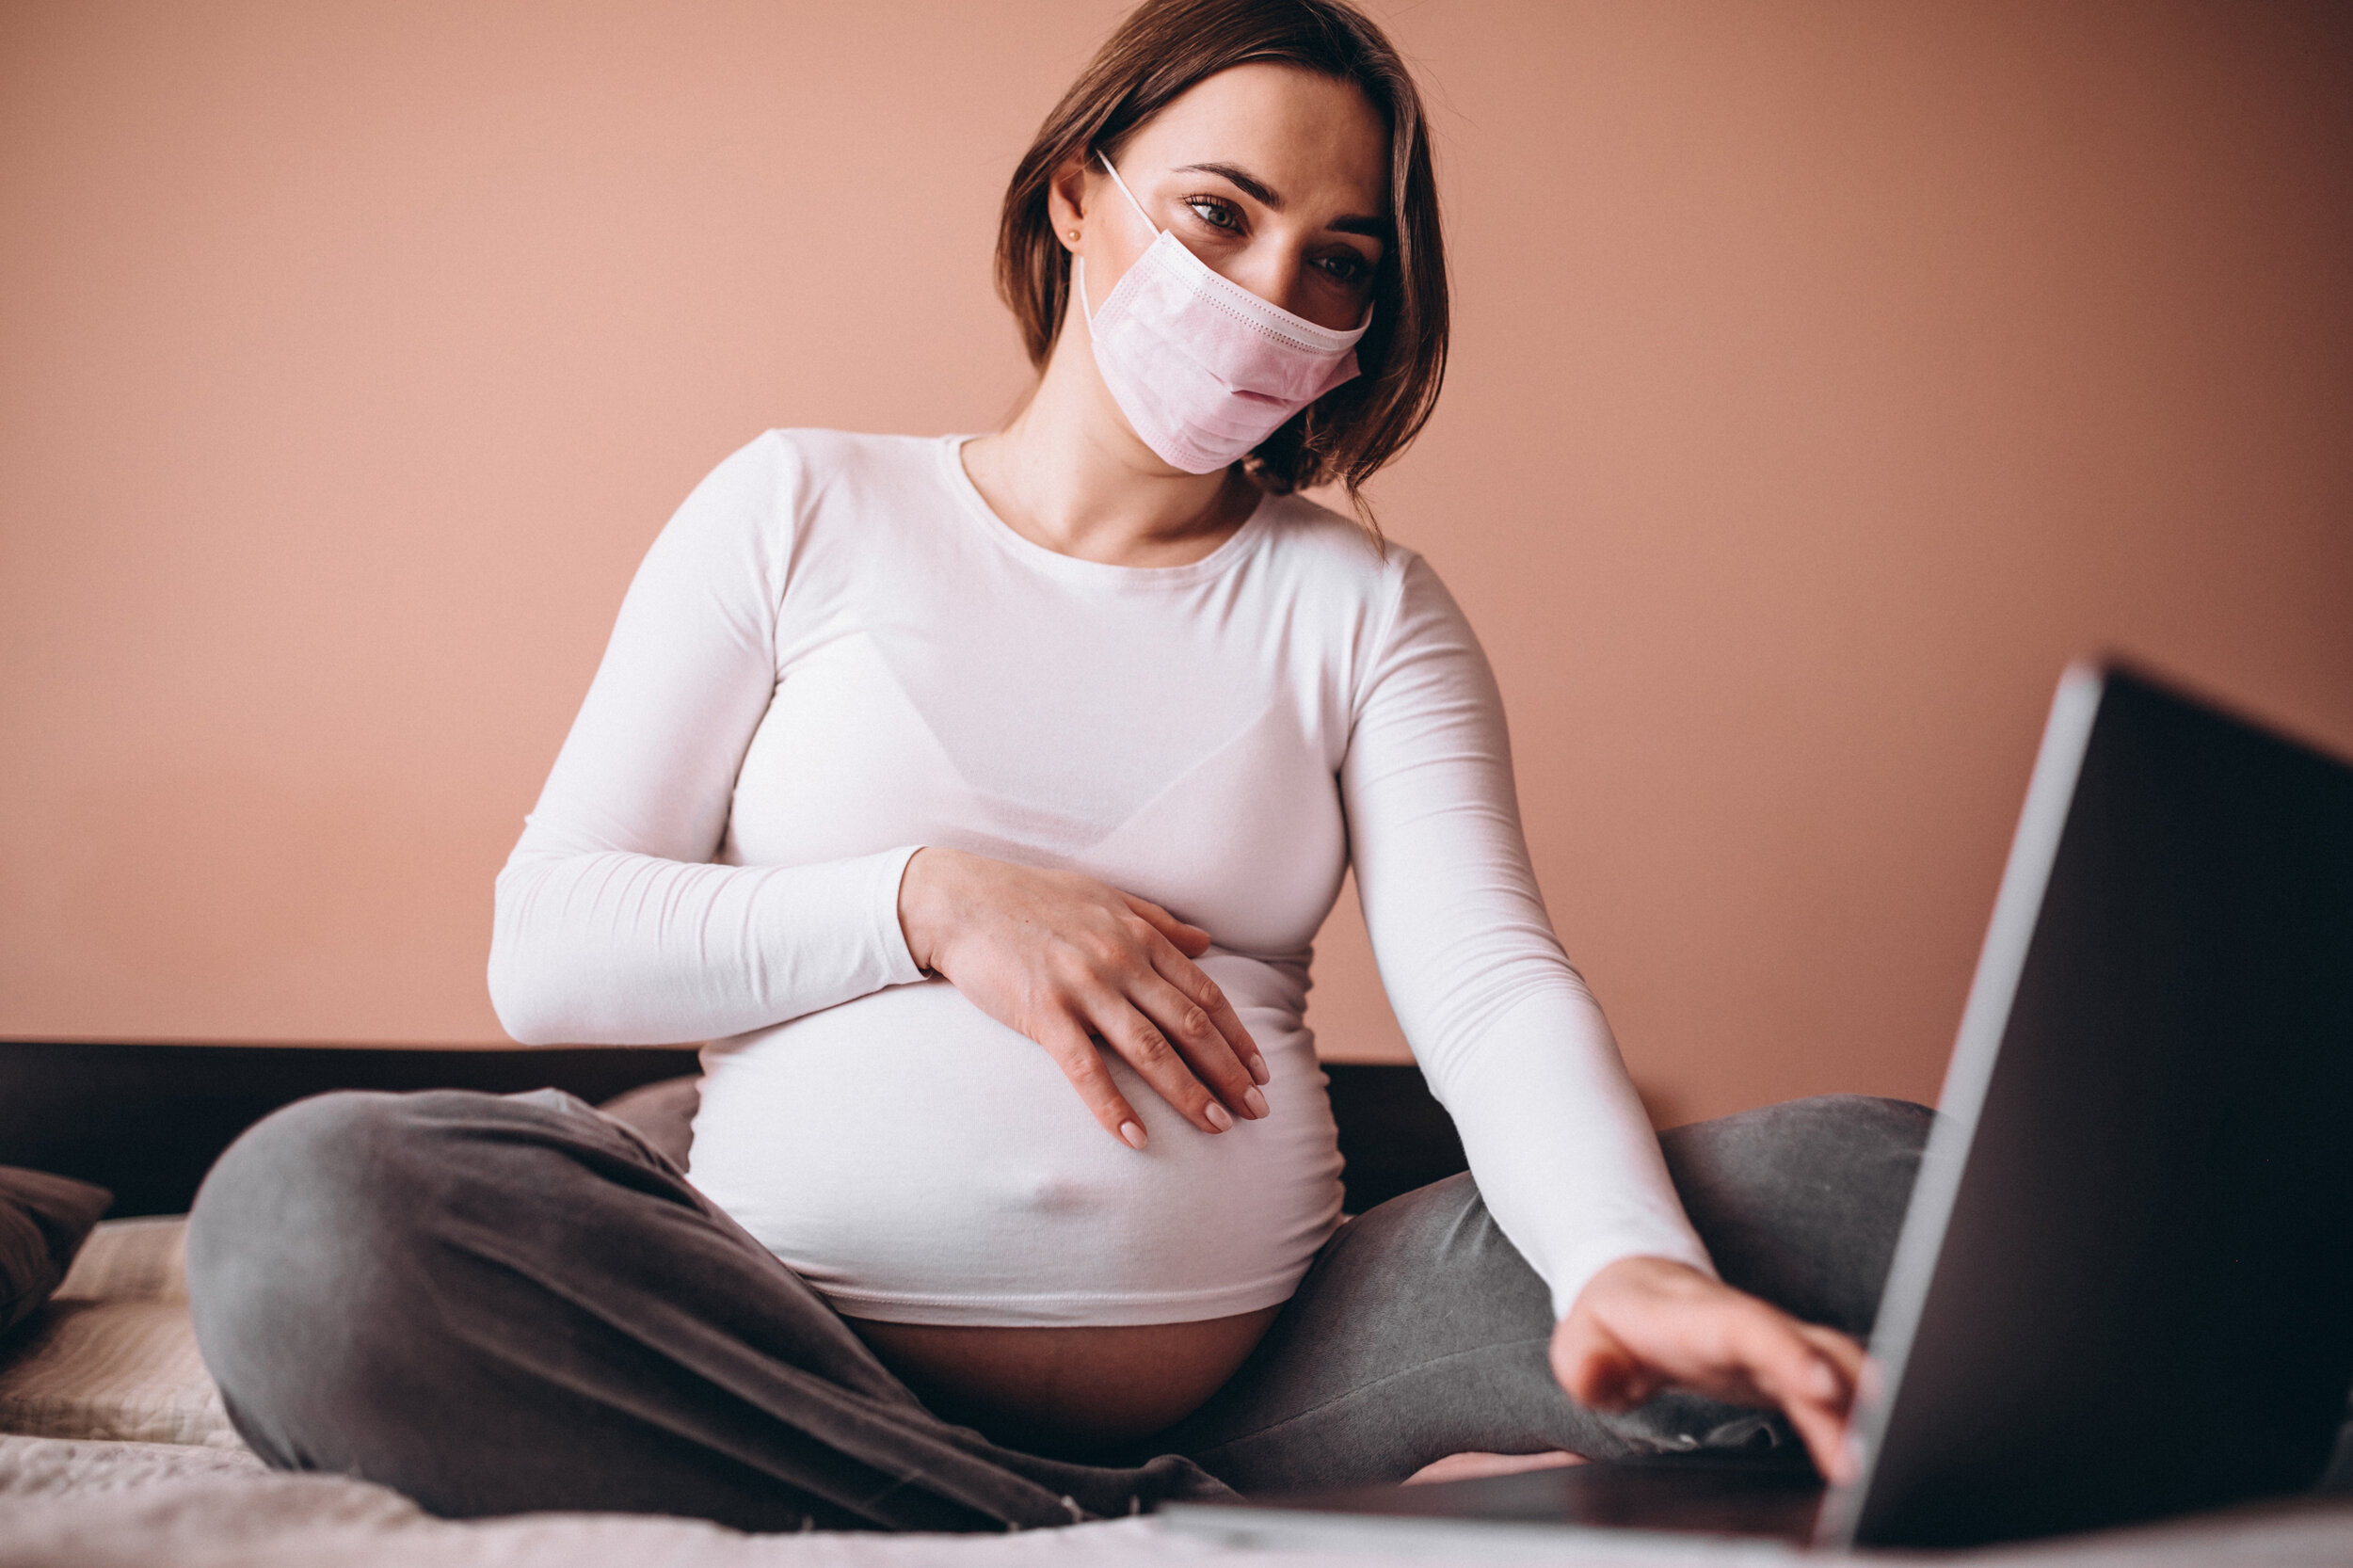 6 Reasons Why Quarantine Is The Best Time To Try To Conceive Naturally